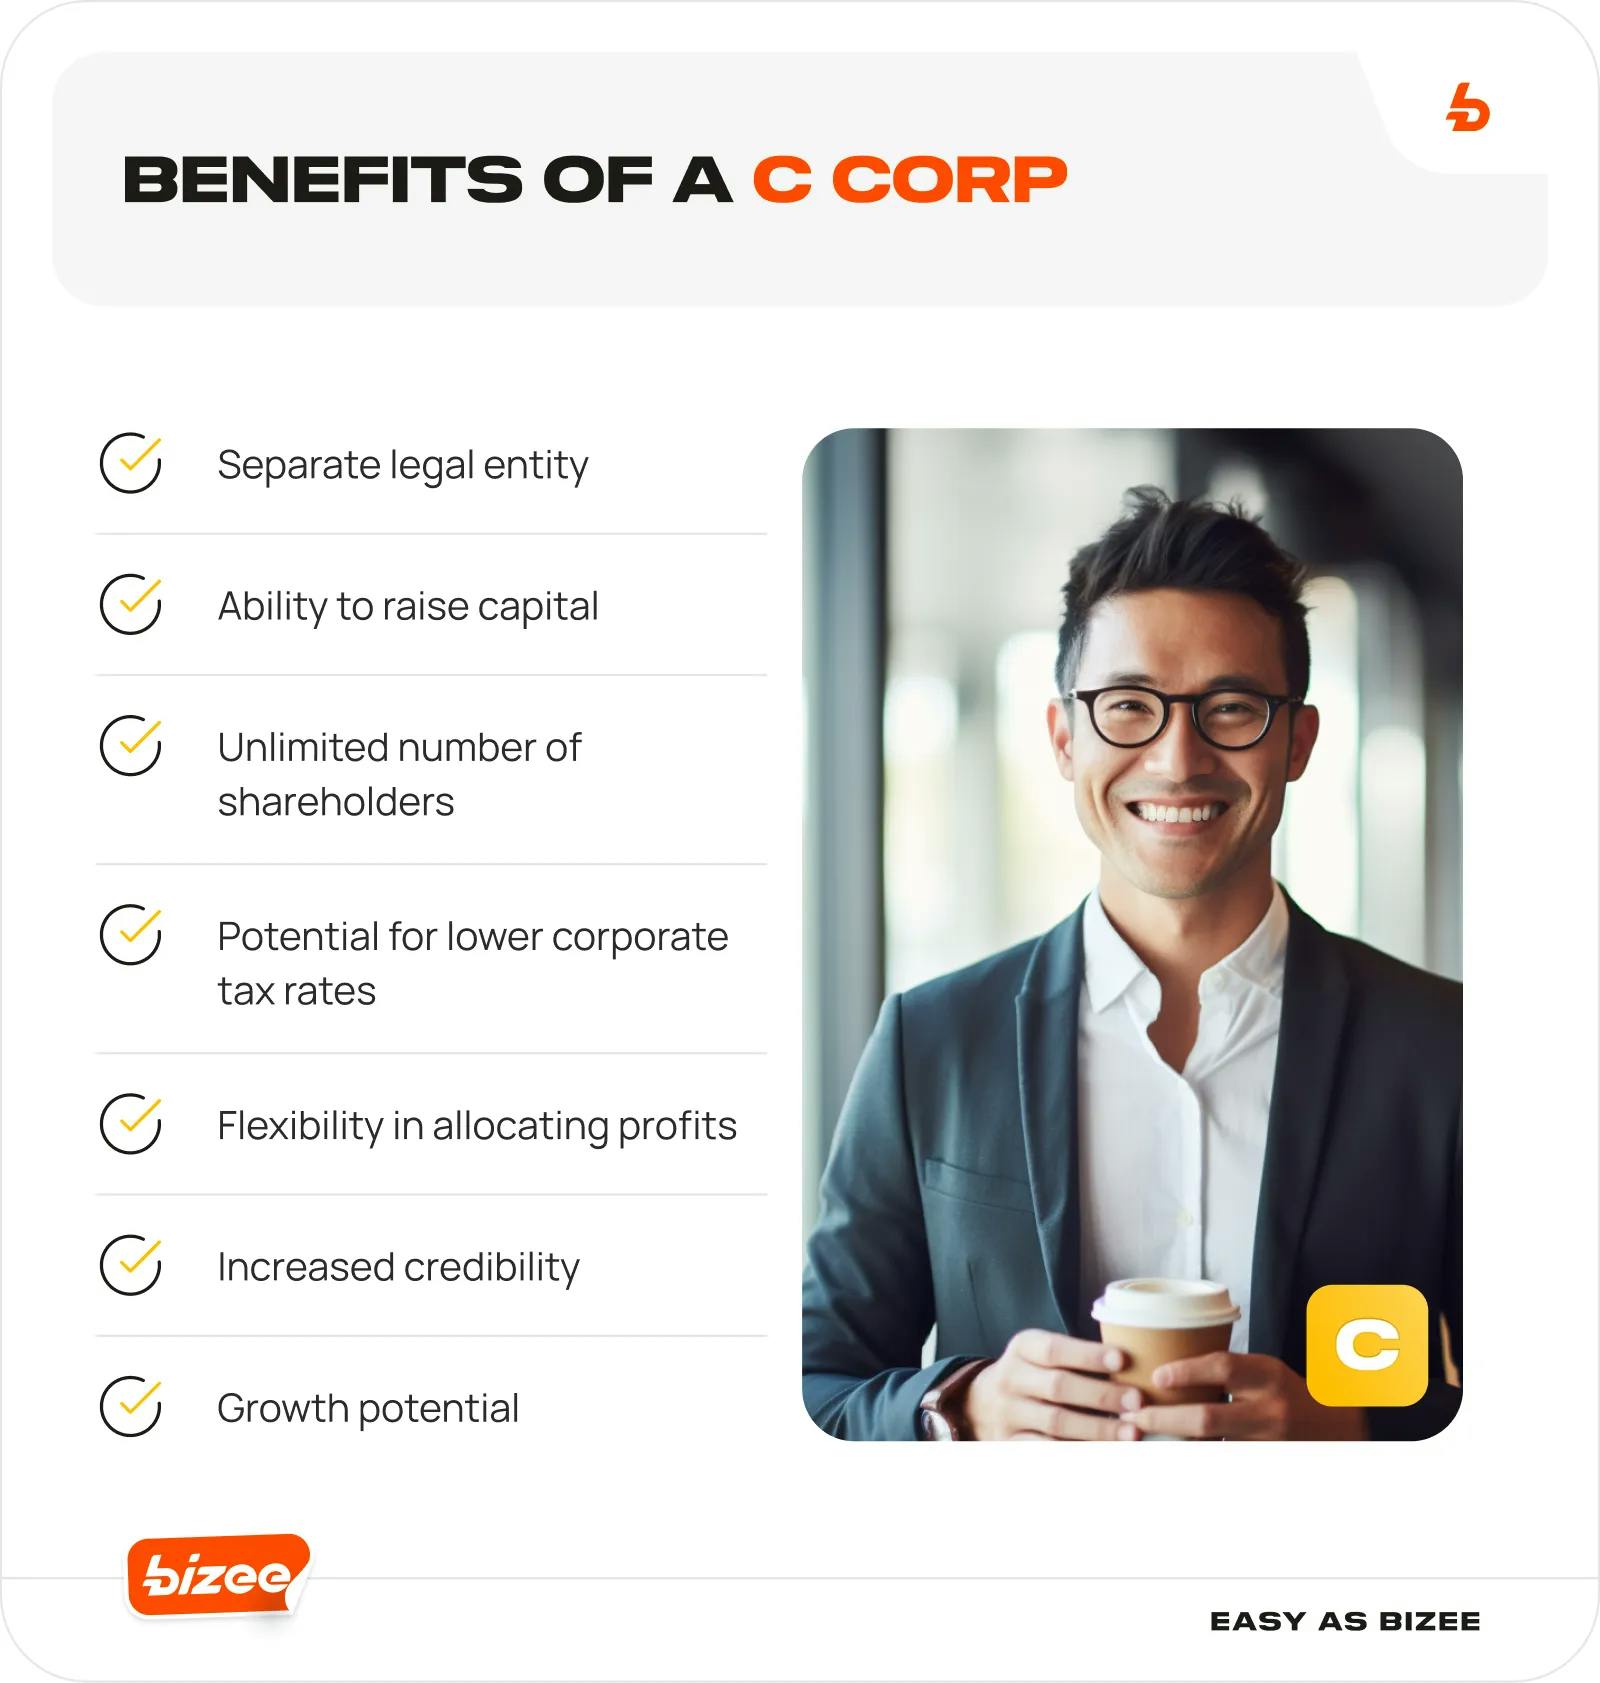 Benefits of a C Corp